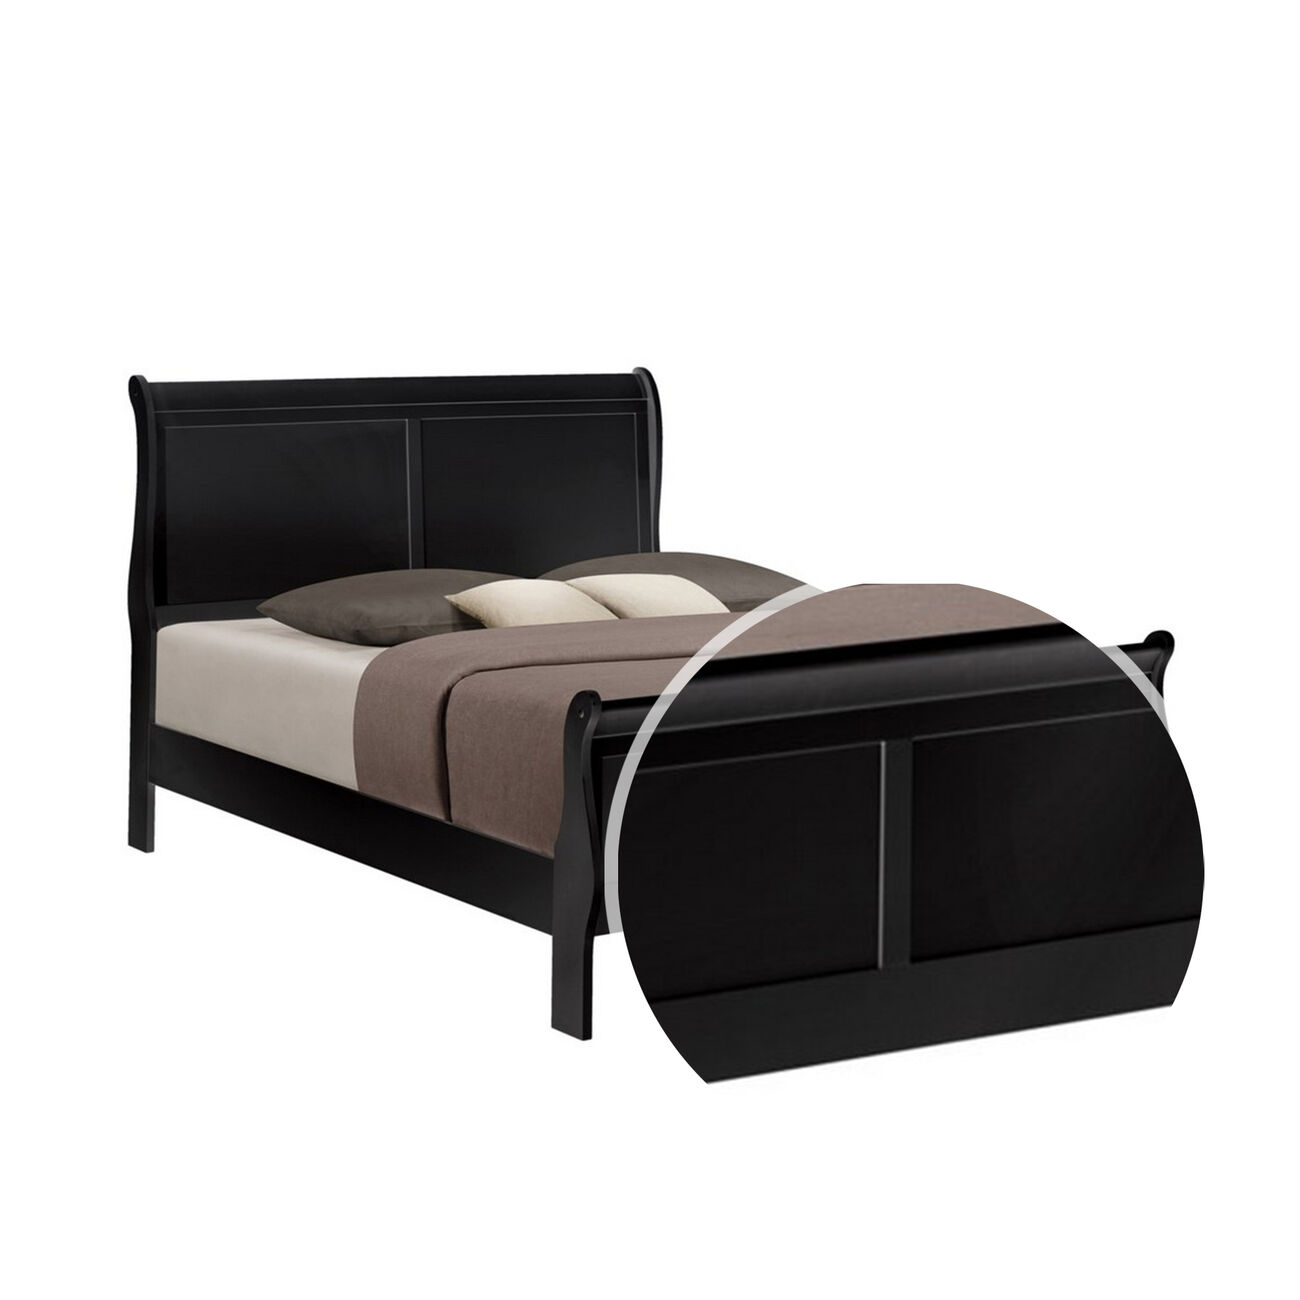 Sleigh Design Wooden Twin Size Headboard and Footboard, Black